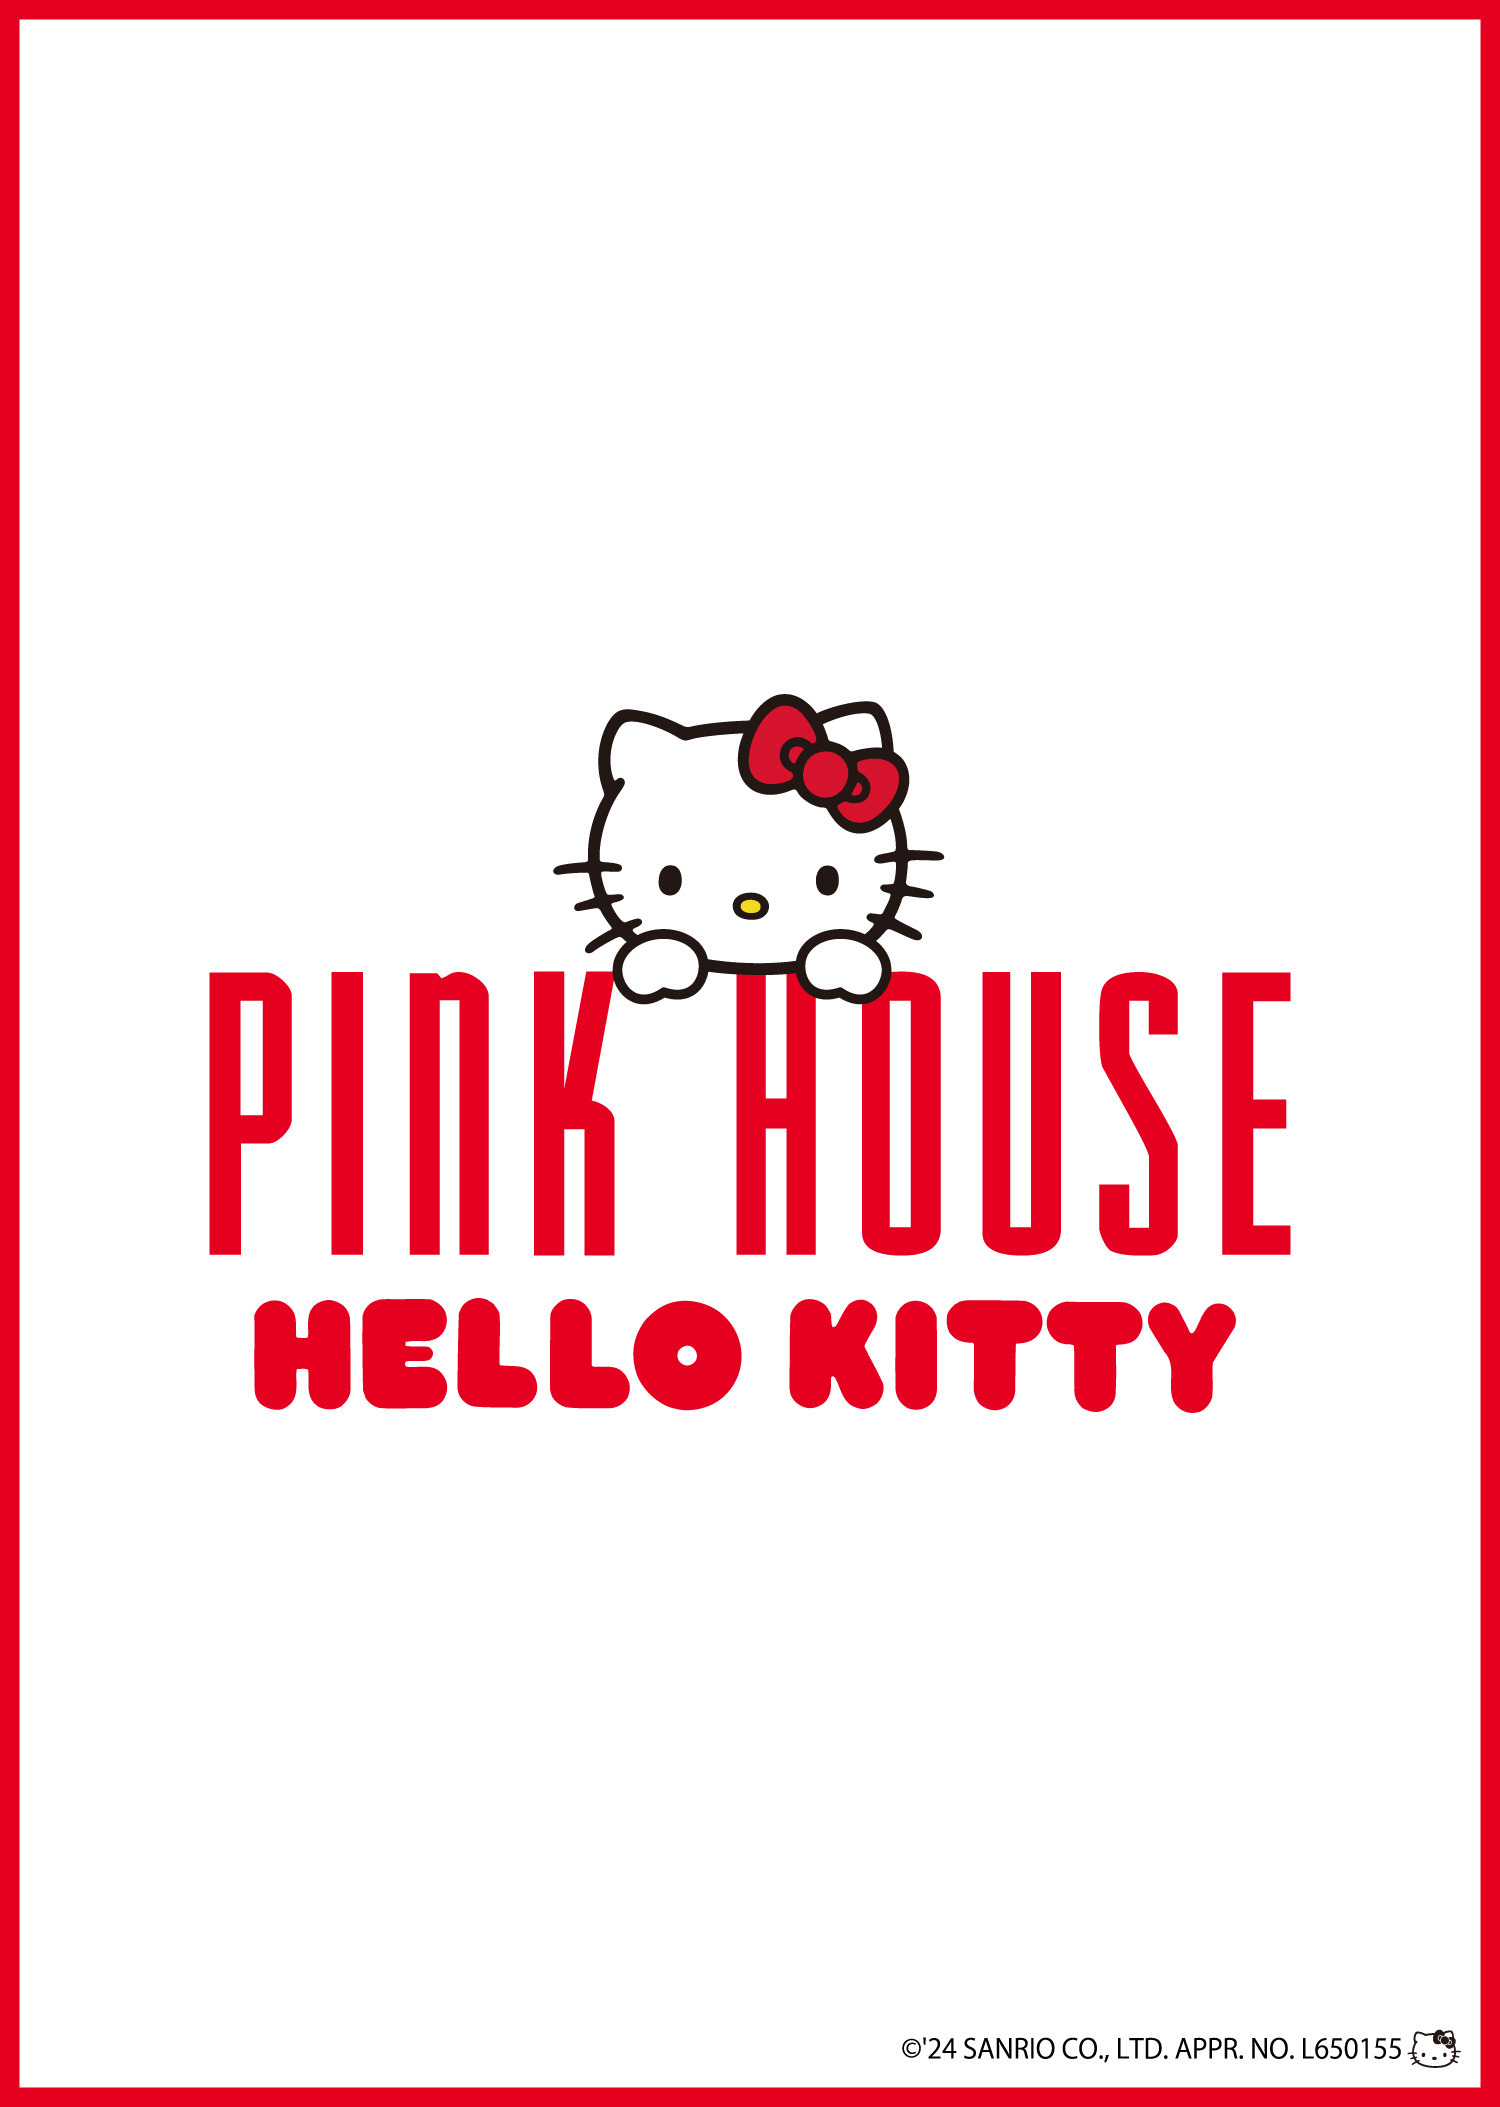 PINK HOUSE×HELLO KITTY コラボレーションアイテム発売｜ピンク 